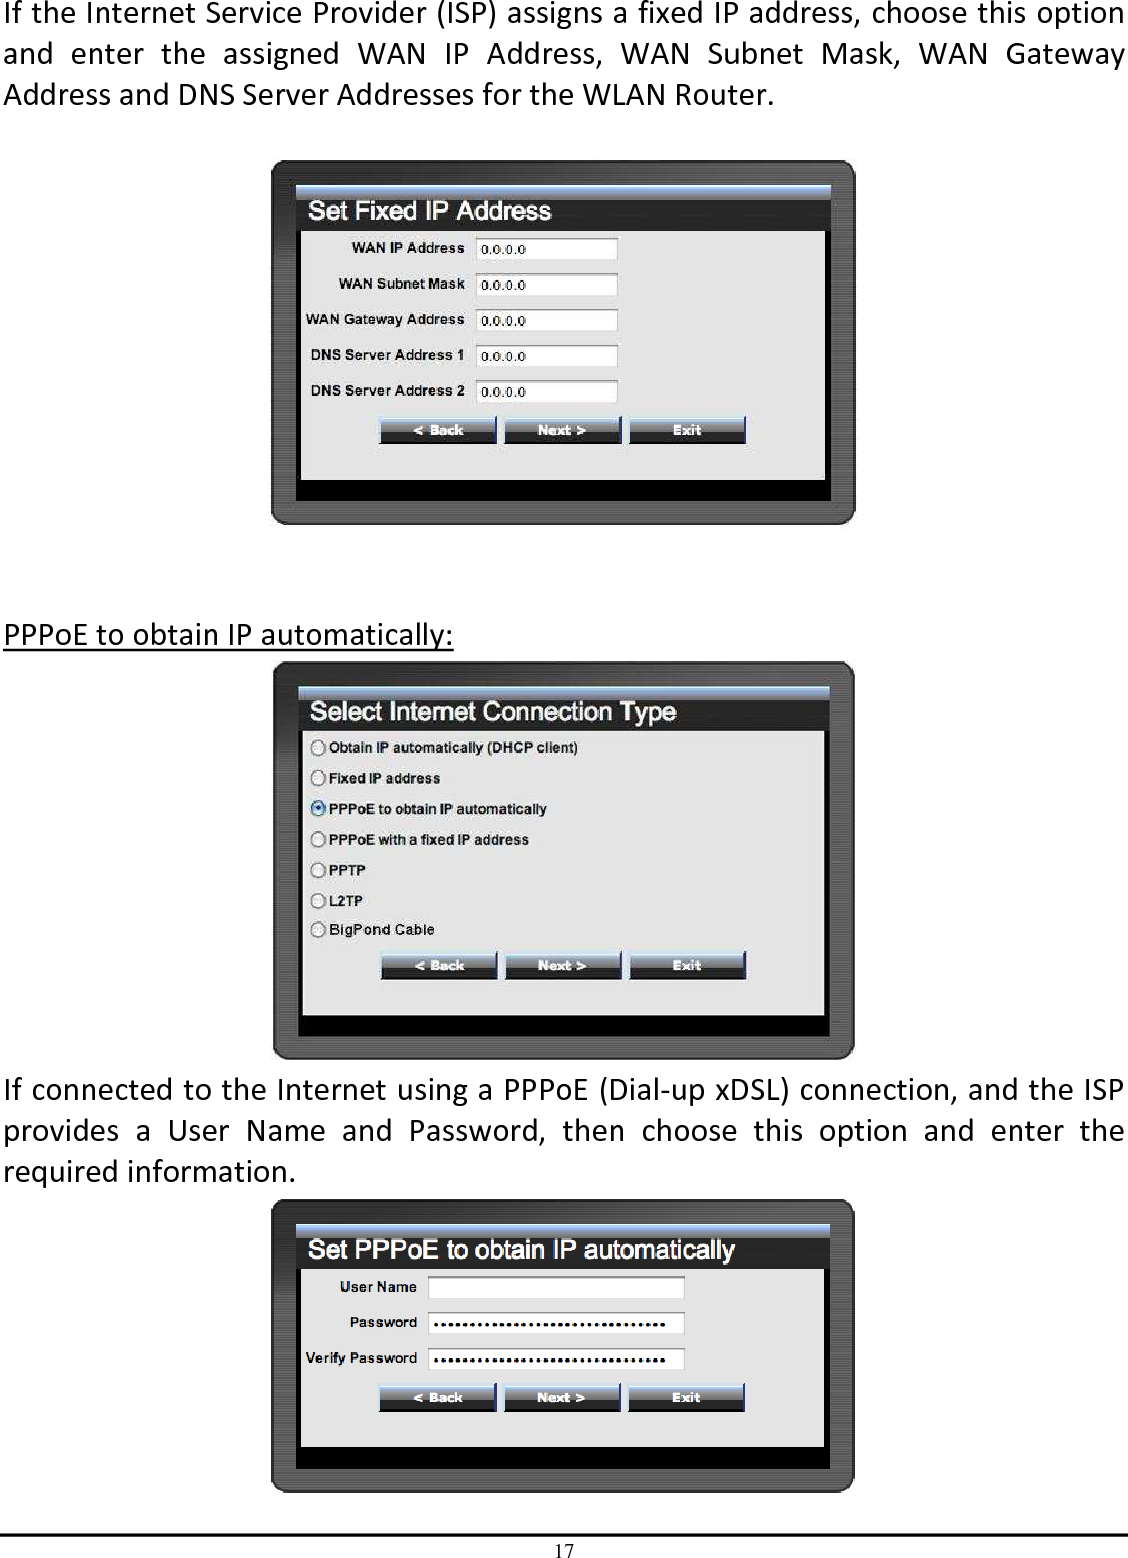 17 If the Internet Service Provider (ISP) assigns a fixed IP address, choose this option and  enter  the  assigned  WAN  IP  Address,  WAN  Subnet  Mask,  WAN  Gateway Address and DNS Server Addresses for the WLAN Router.     PPPoE to obtain IP automatically:  If connected to the Internet using a PPPoE (Dial-up xDSL) connection, and the ISP provides  a  User  Name  and  Password,  then  choose  this  option  and  enter  the required information.  